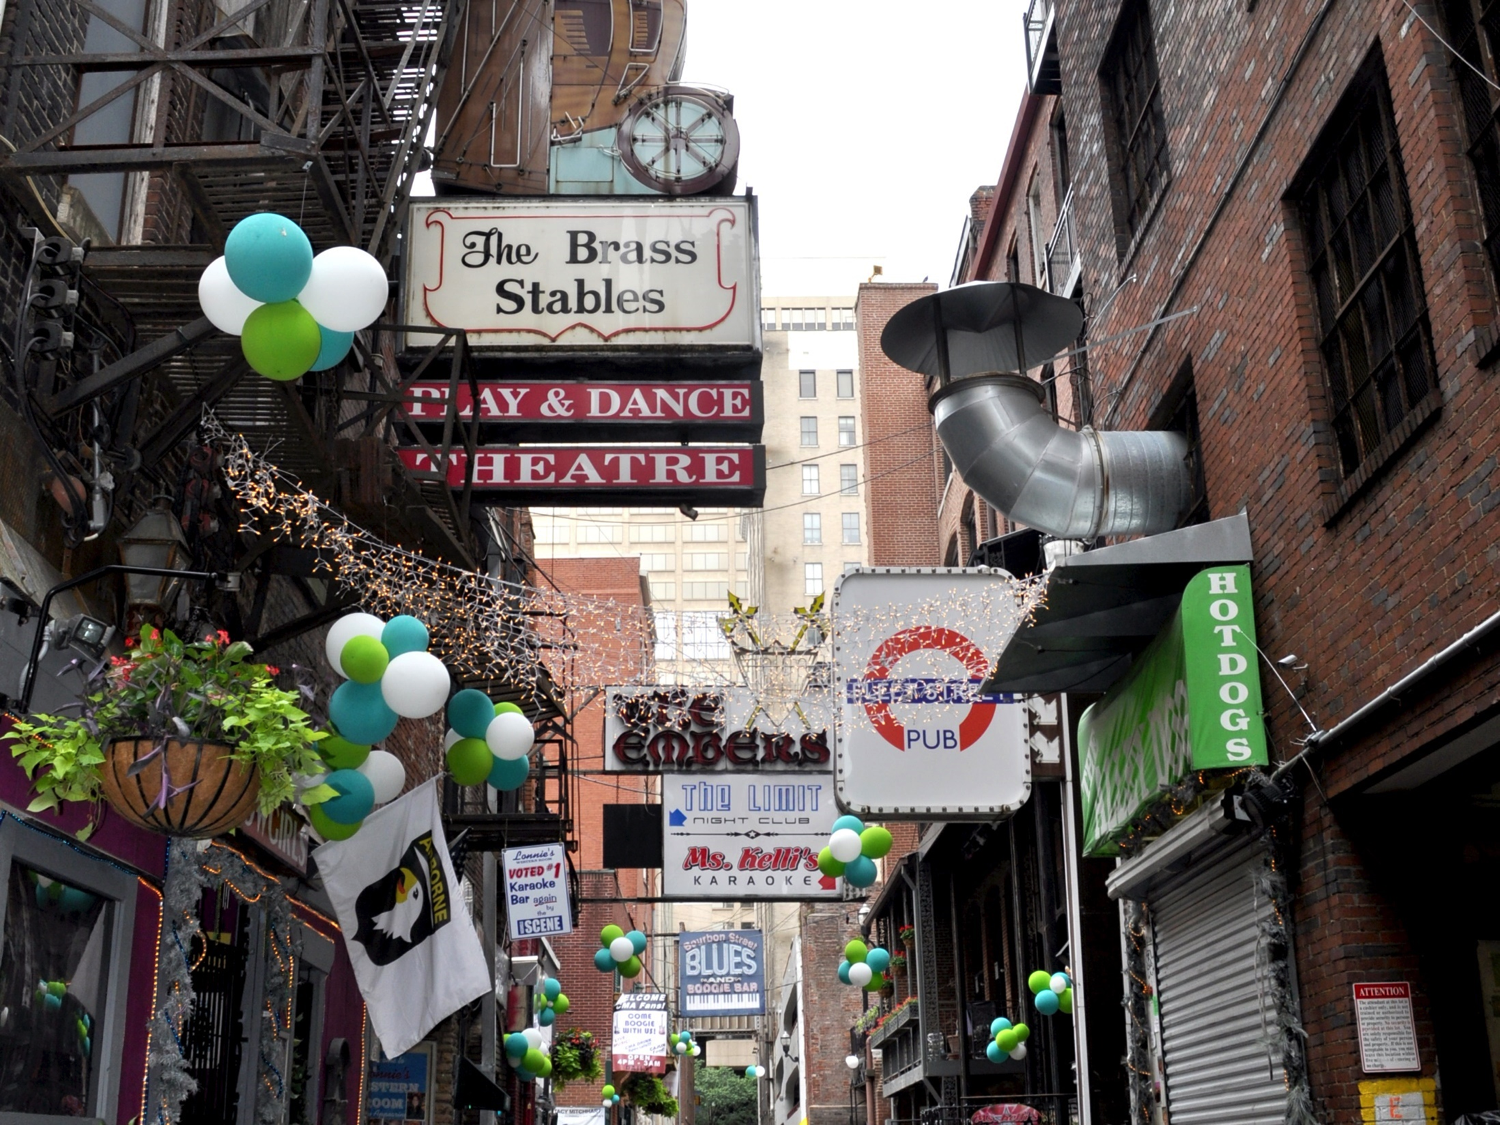 Printers Alley Itself by Chris Connelly via Flickr (CC BY 2.0)